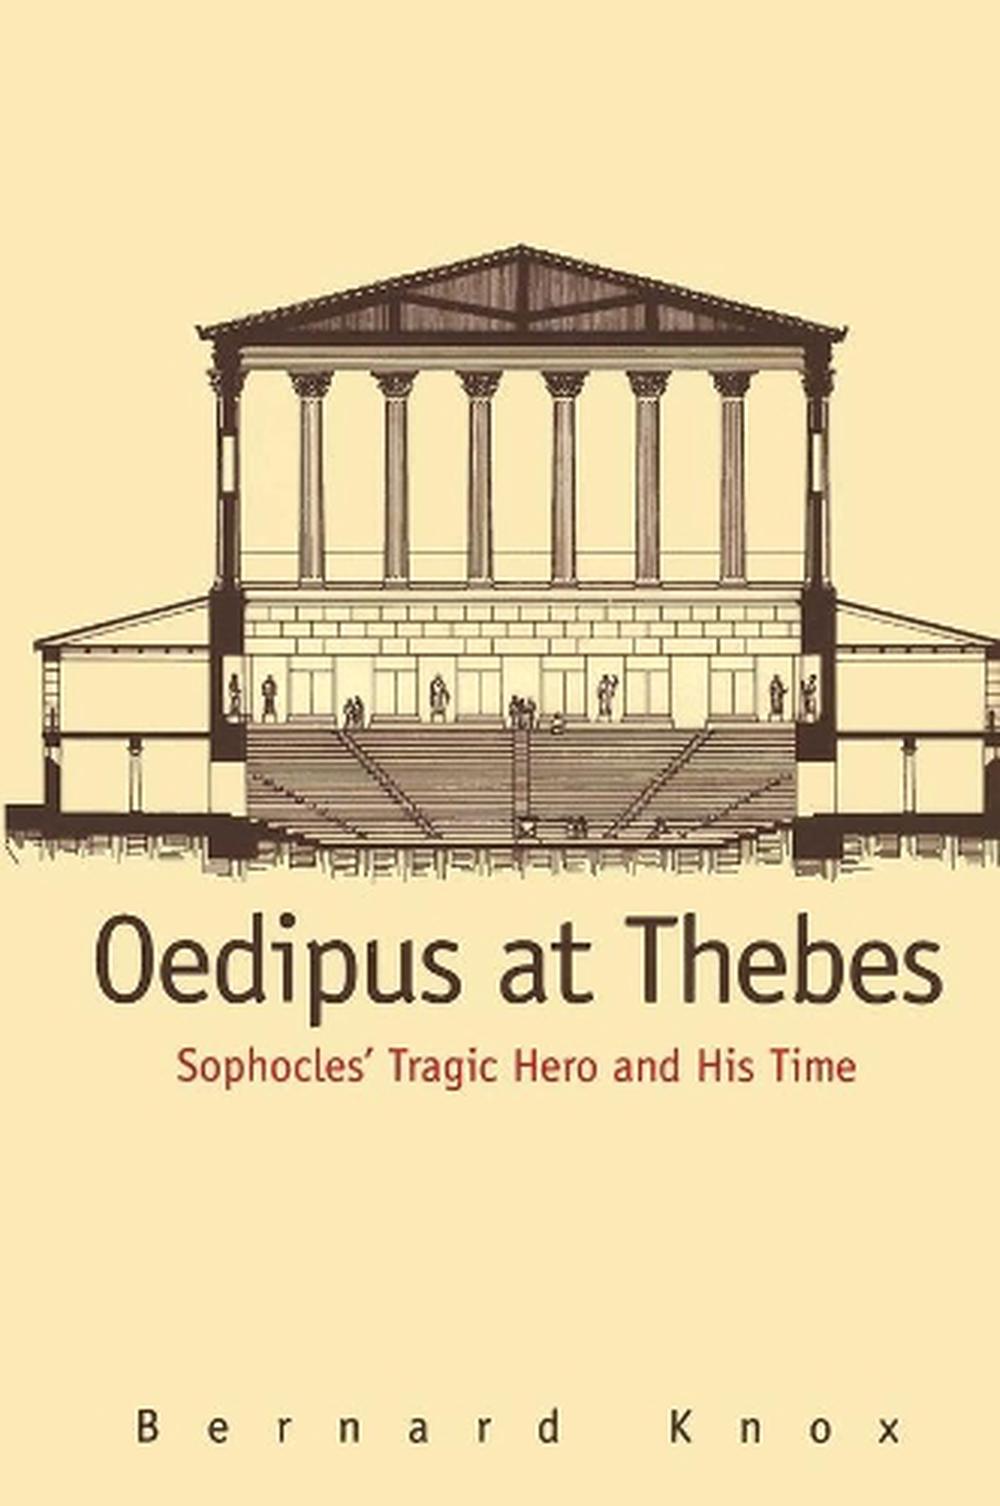 the oedipus plays of sophocles